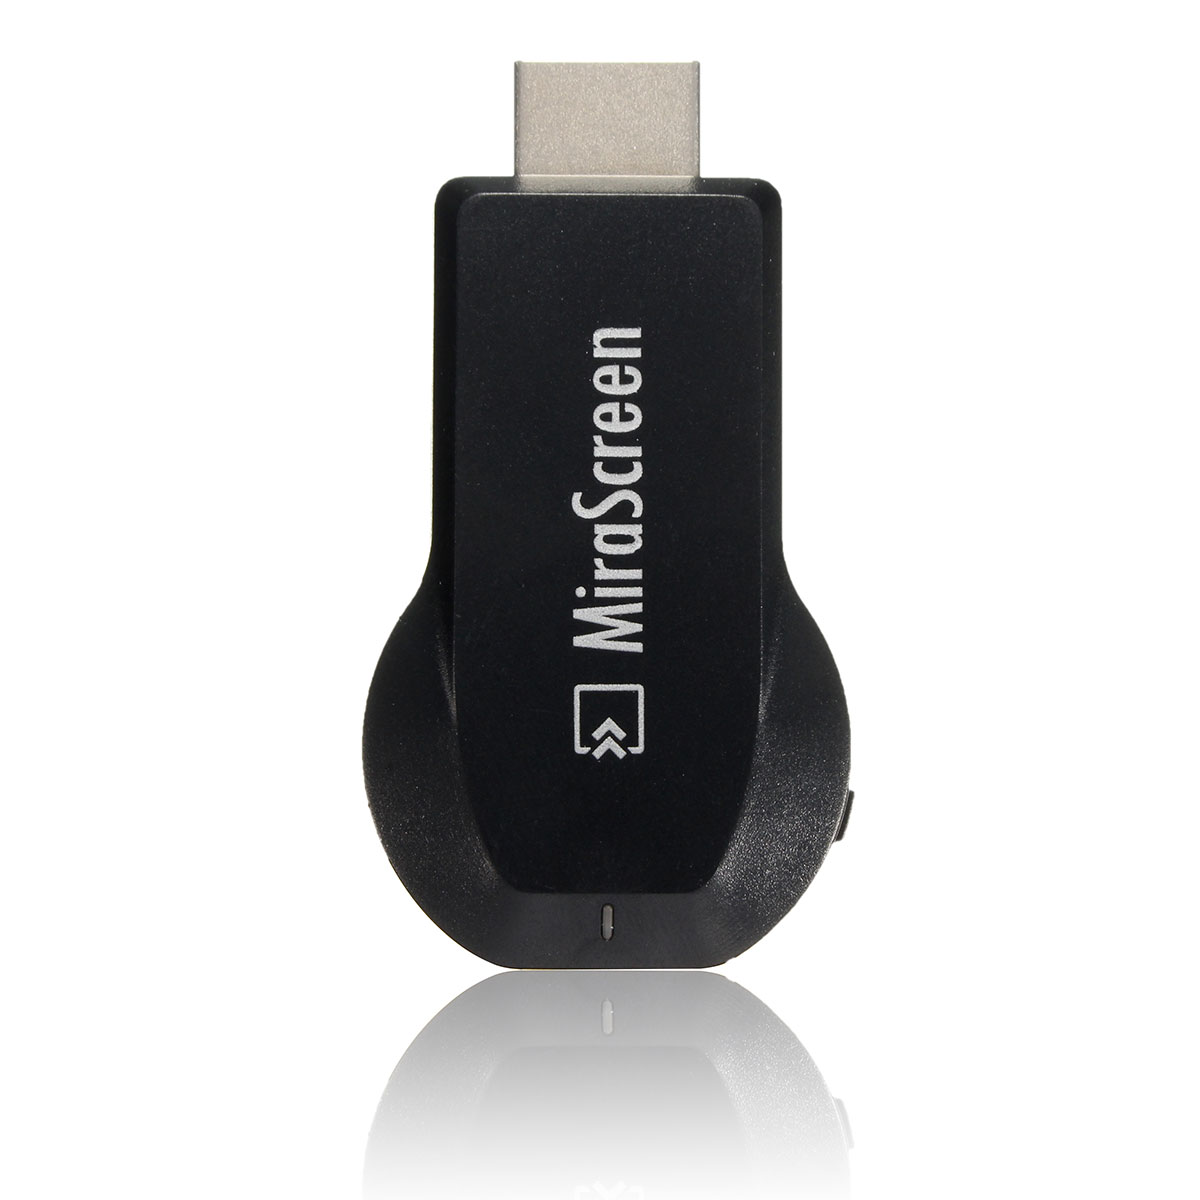 WIFI Display Dongle Adapter HDMI Miracast D